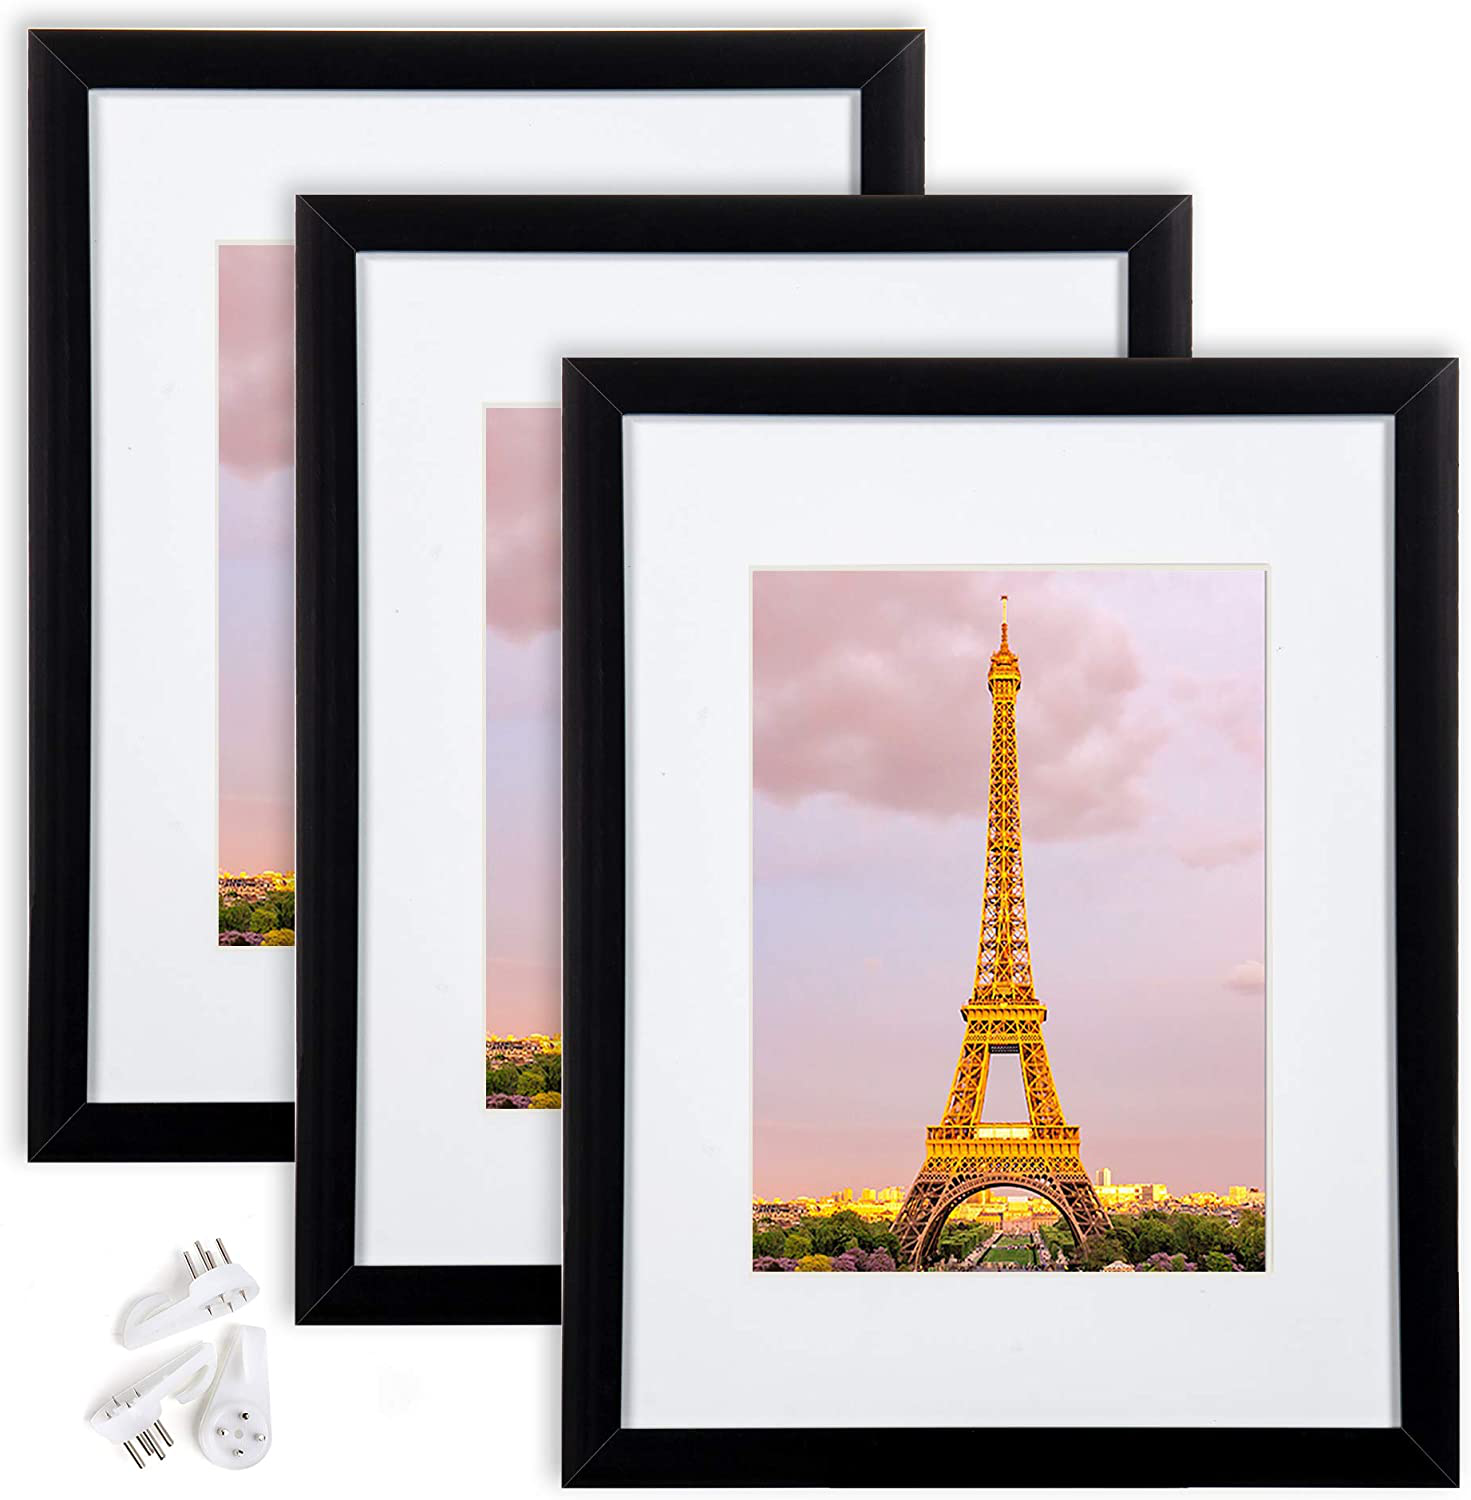 upsimples 11x14 Picture Frame Set of 3,Made of High Definition Glass for 8x10 with Mat or 11x14 Without Mat,Wall Mounting Photo Frame Ash Gray